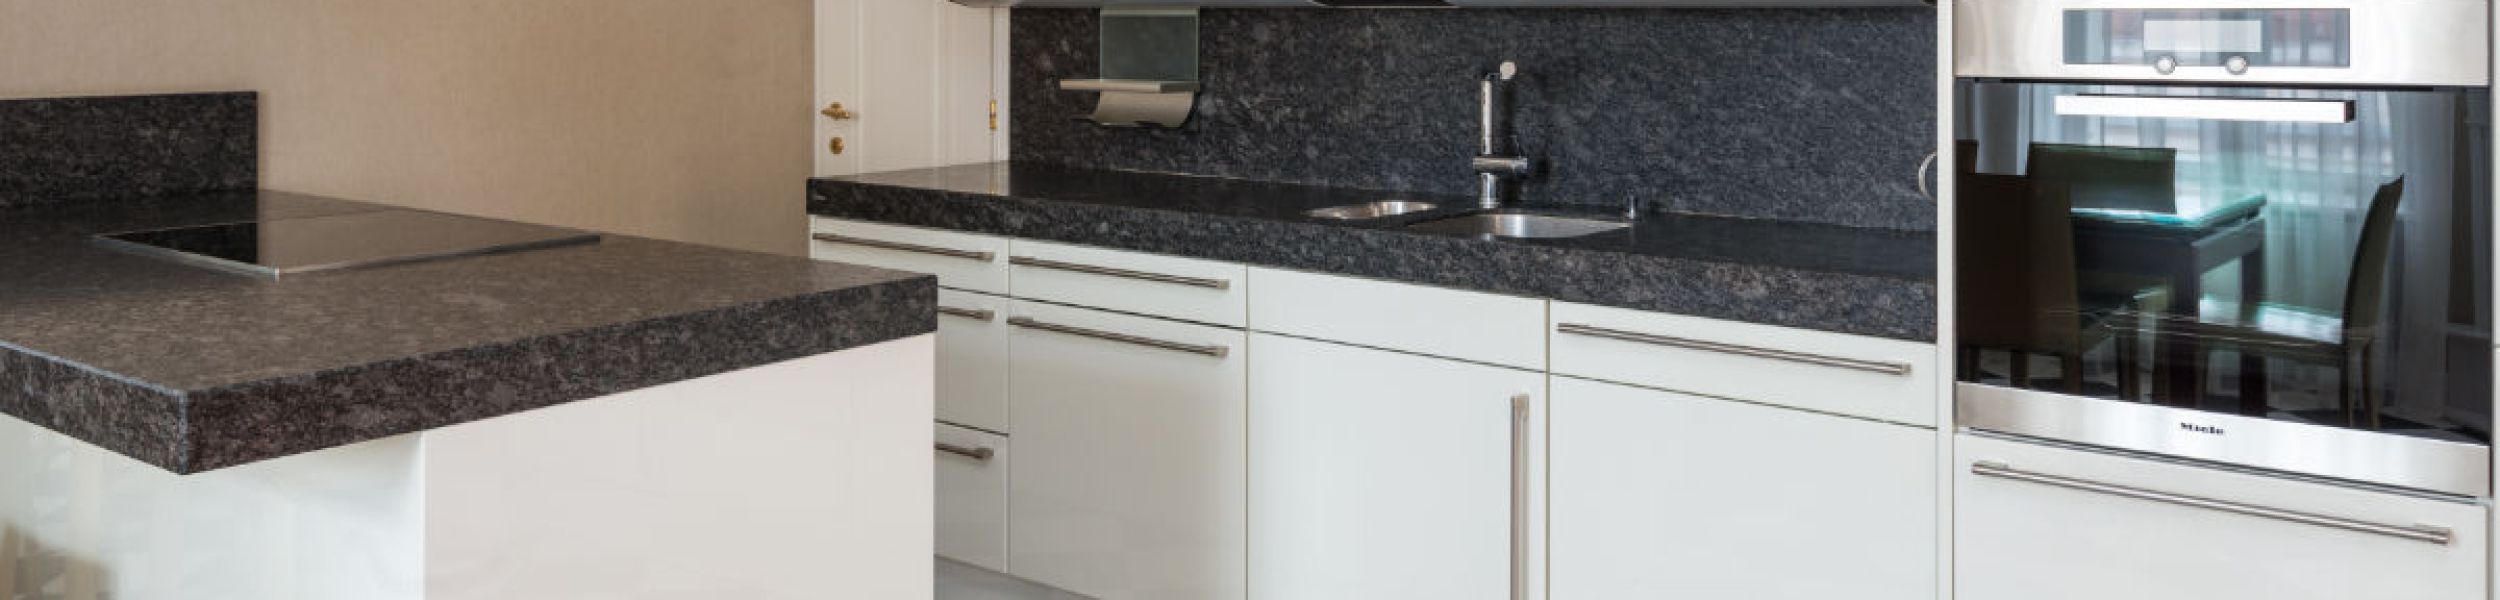 Dark style granite countertop is a good choice for restaurants and bars.